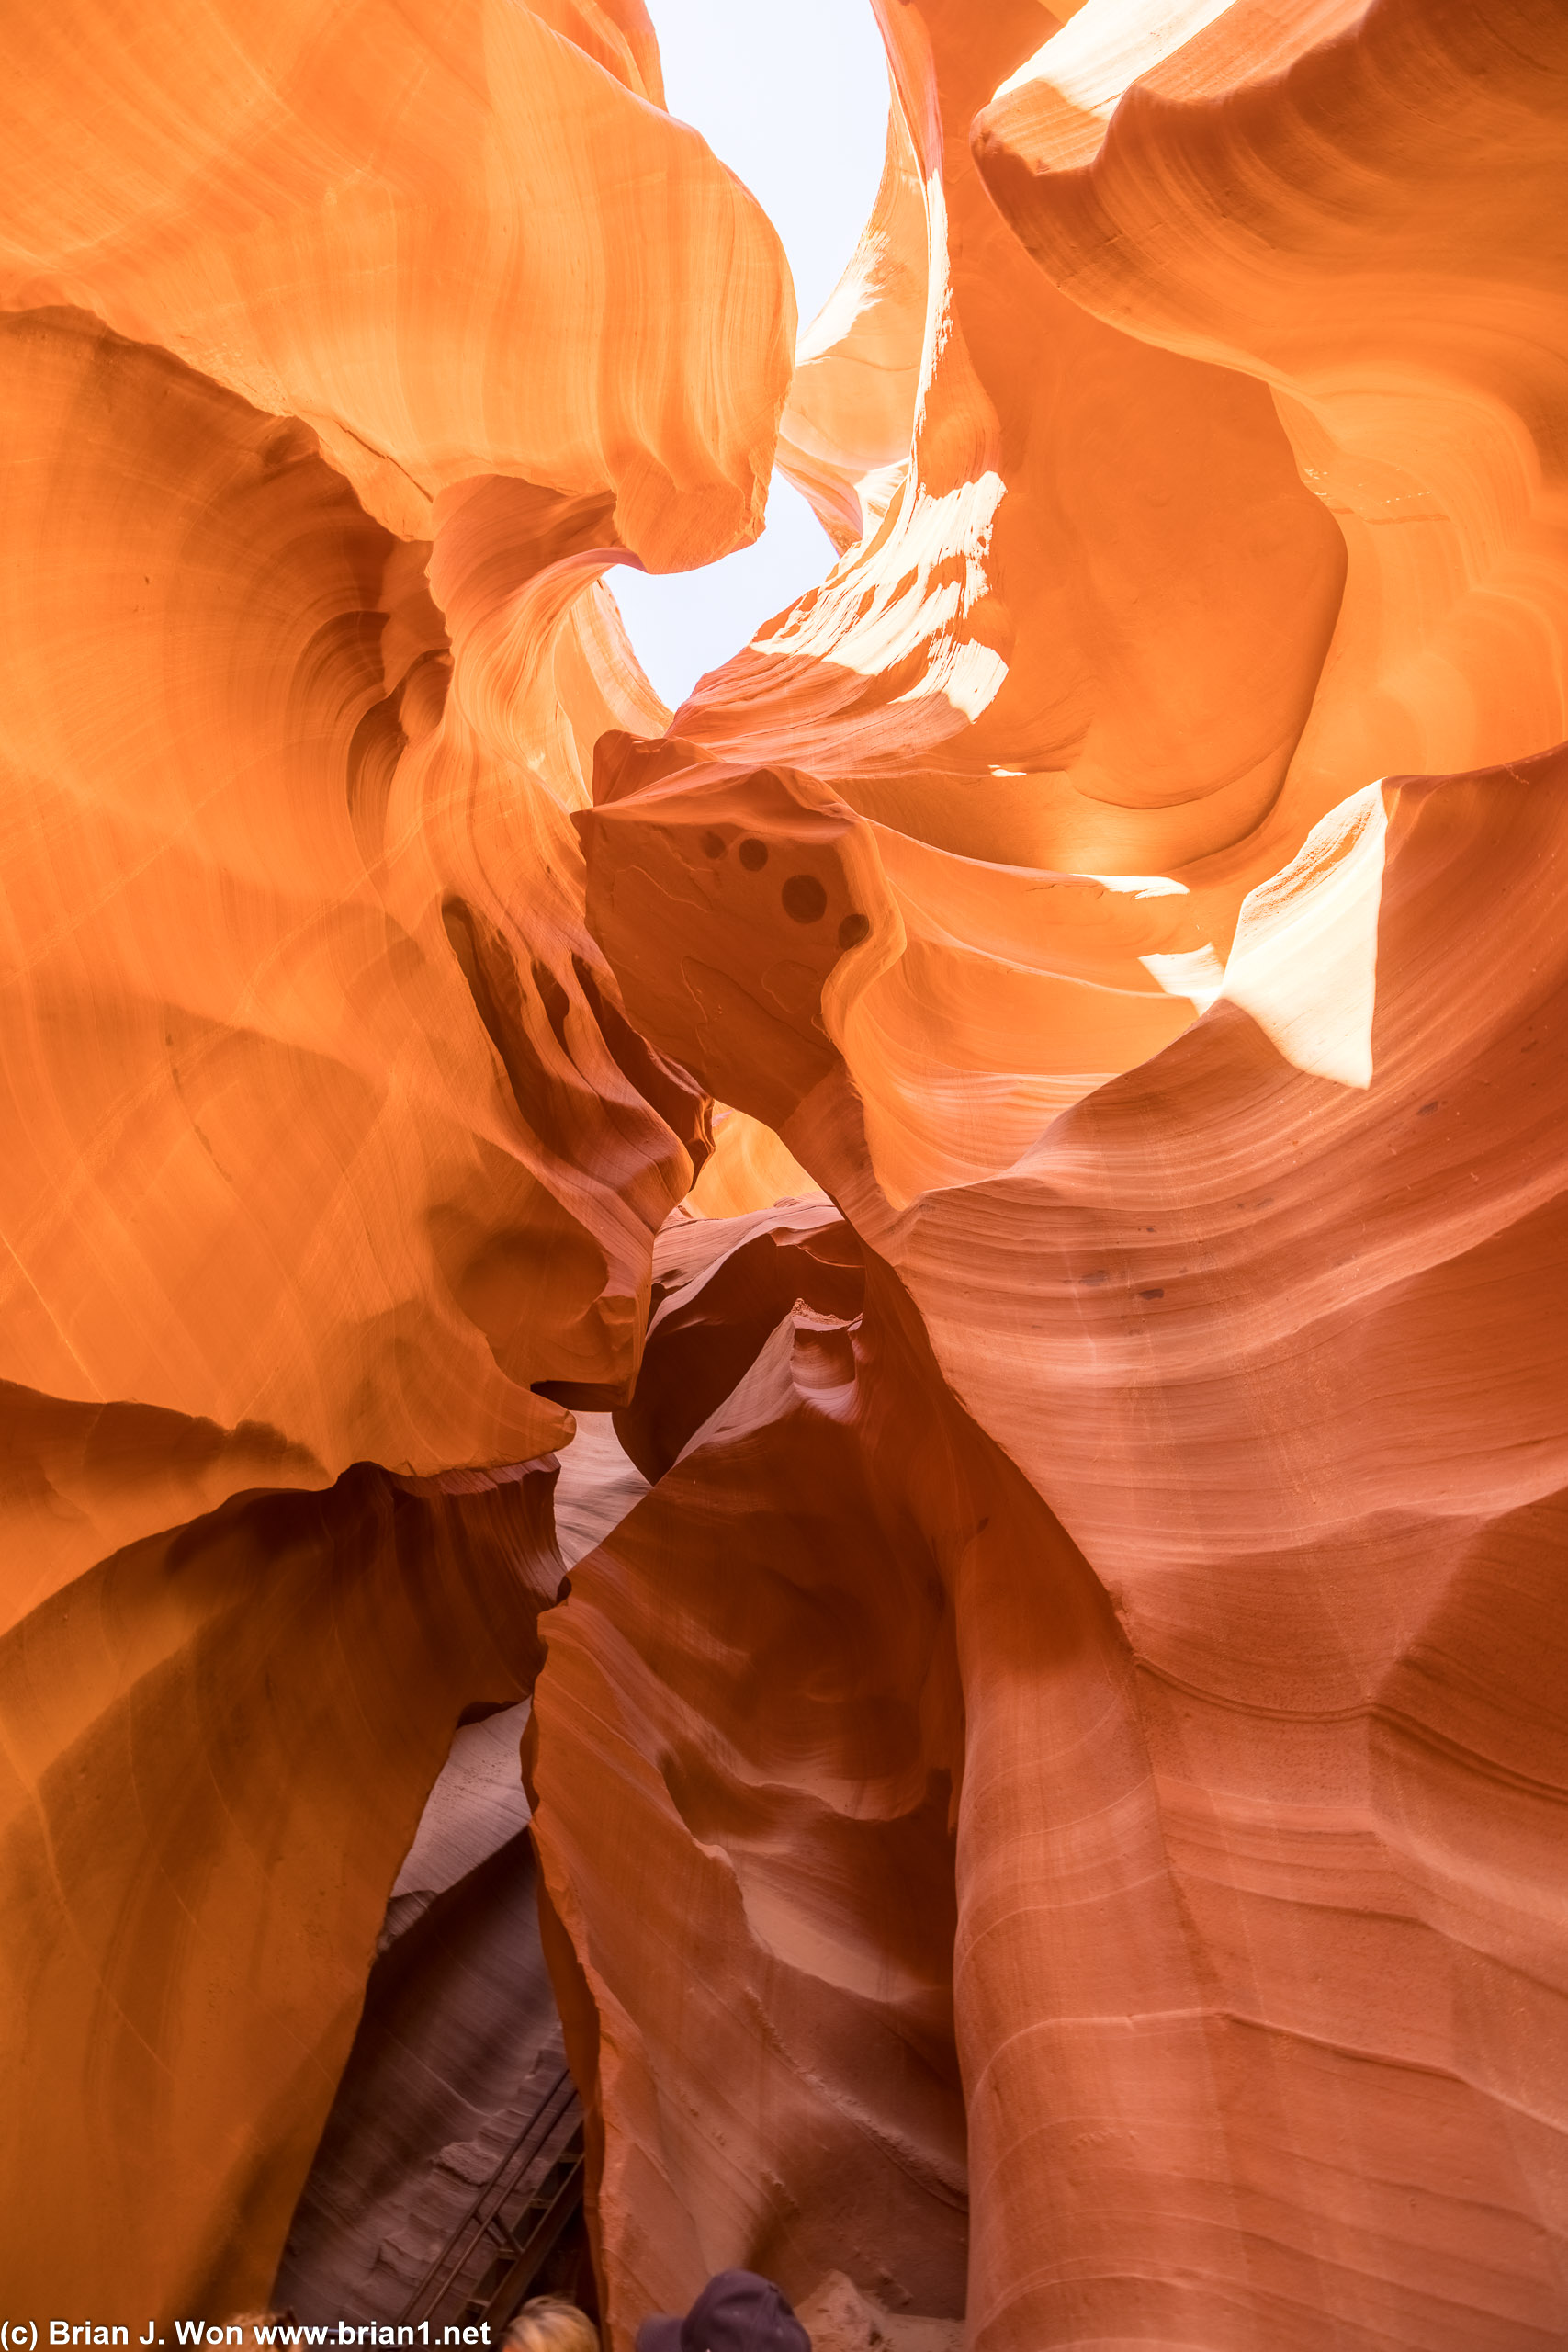 Now in Lower Antelope Canyon.